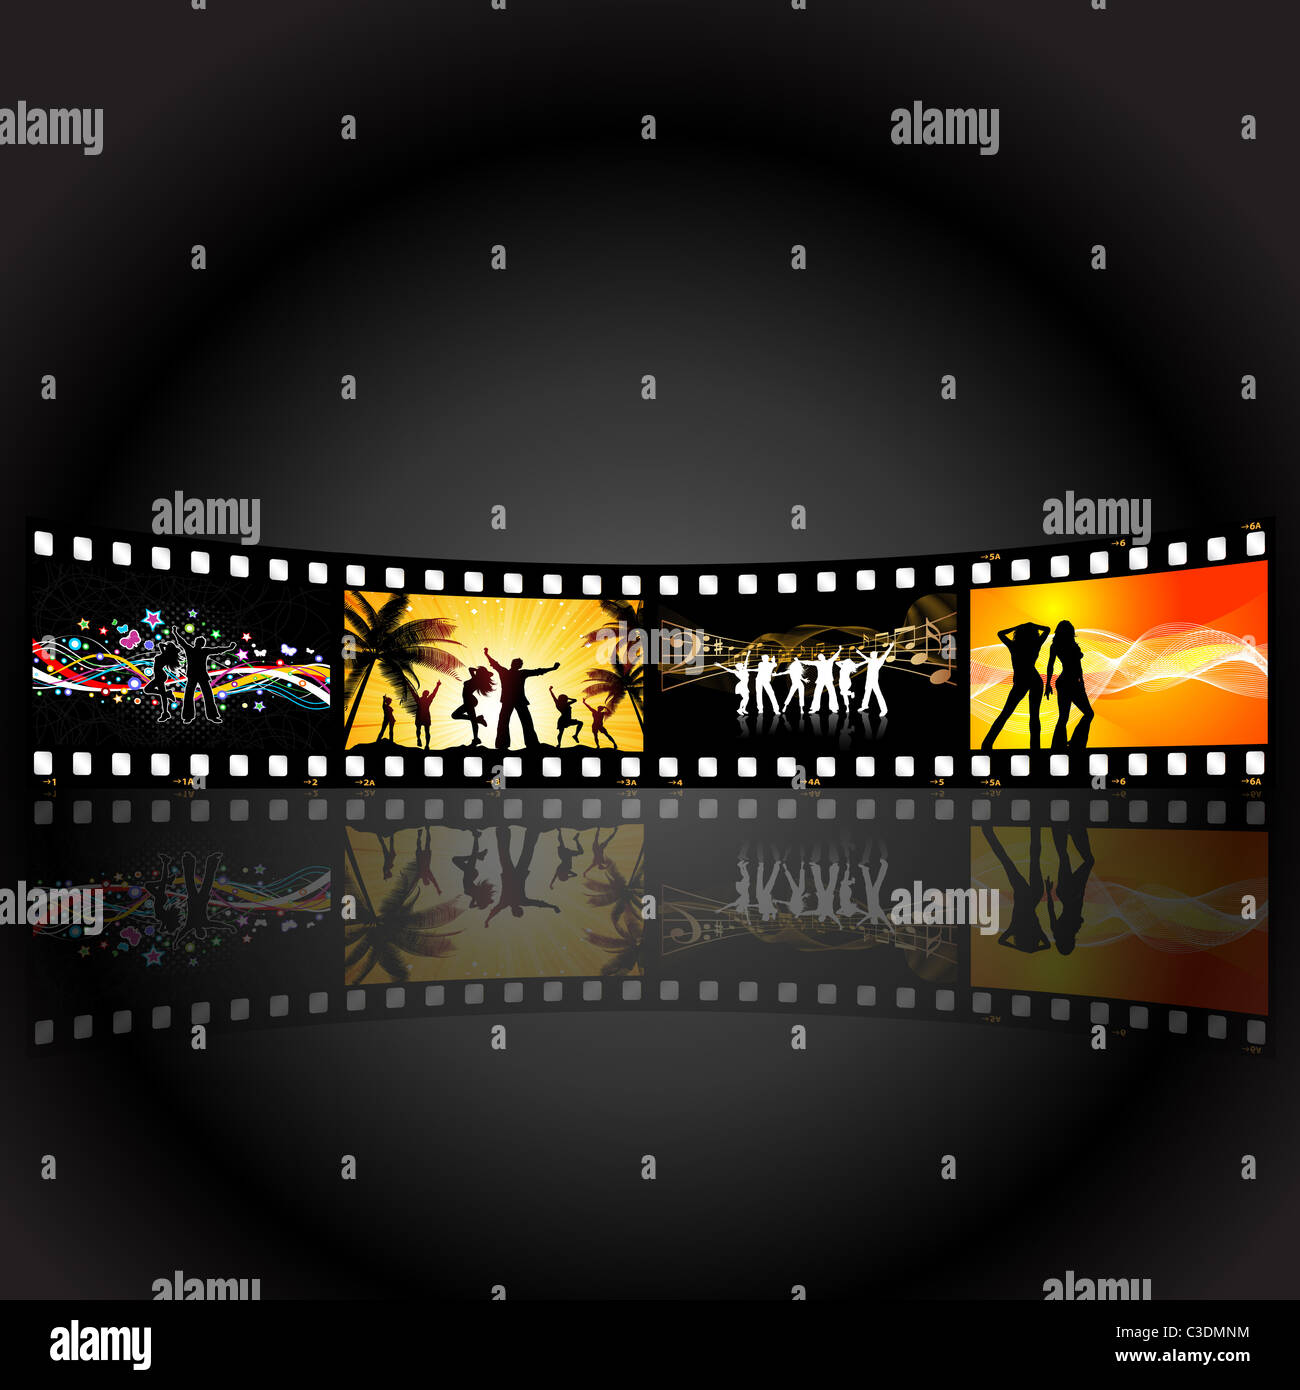 Illustrations of people dancing on a film strip background Stock Photo